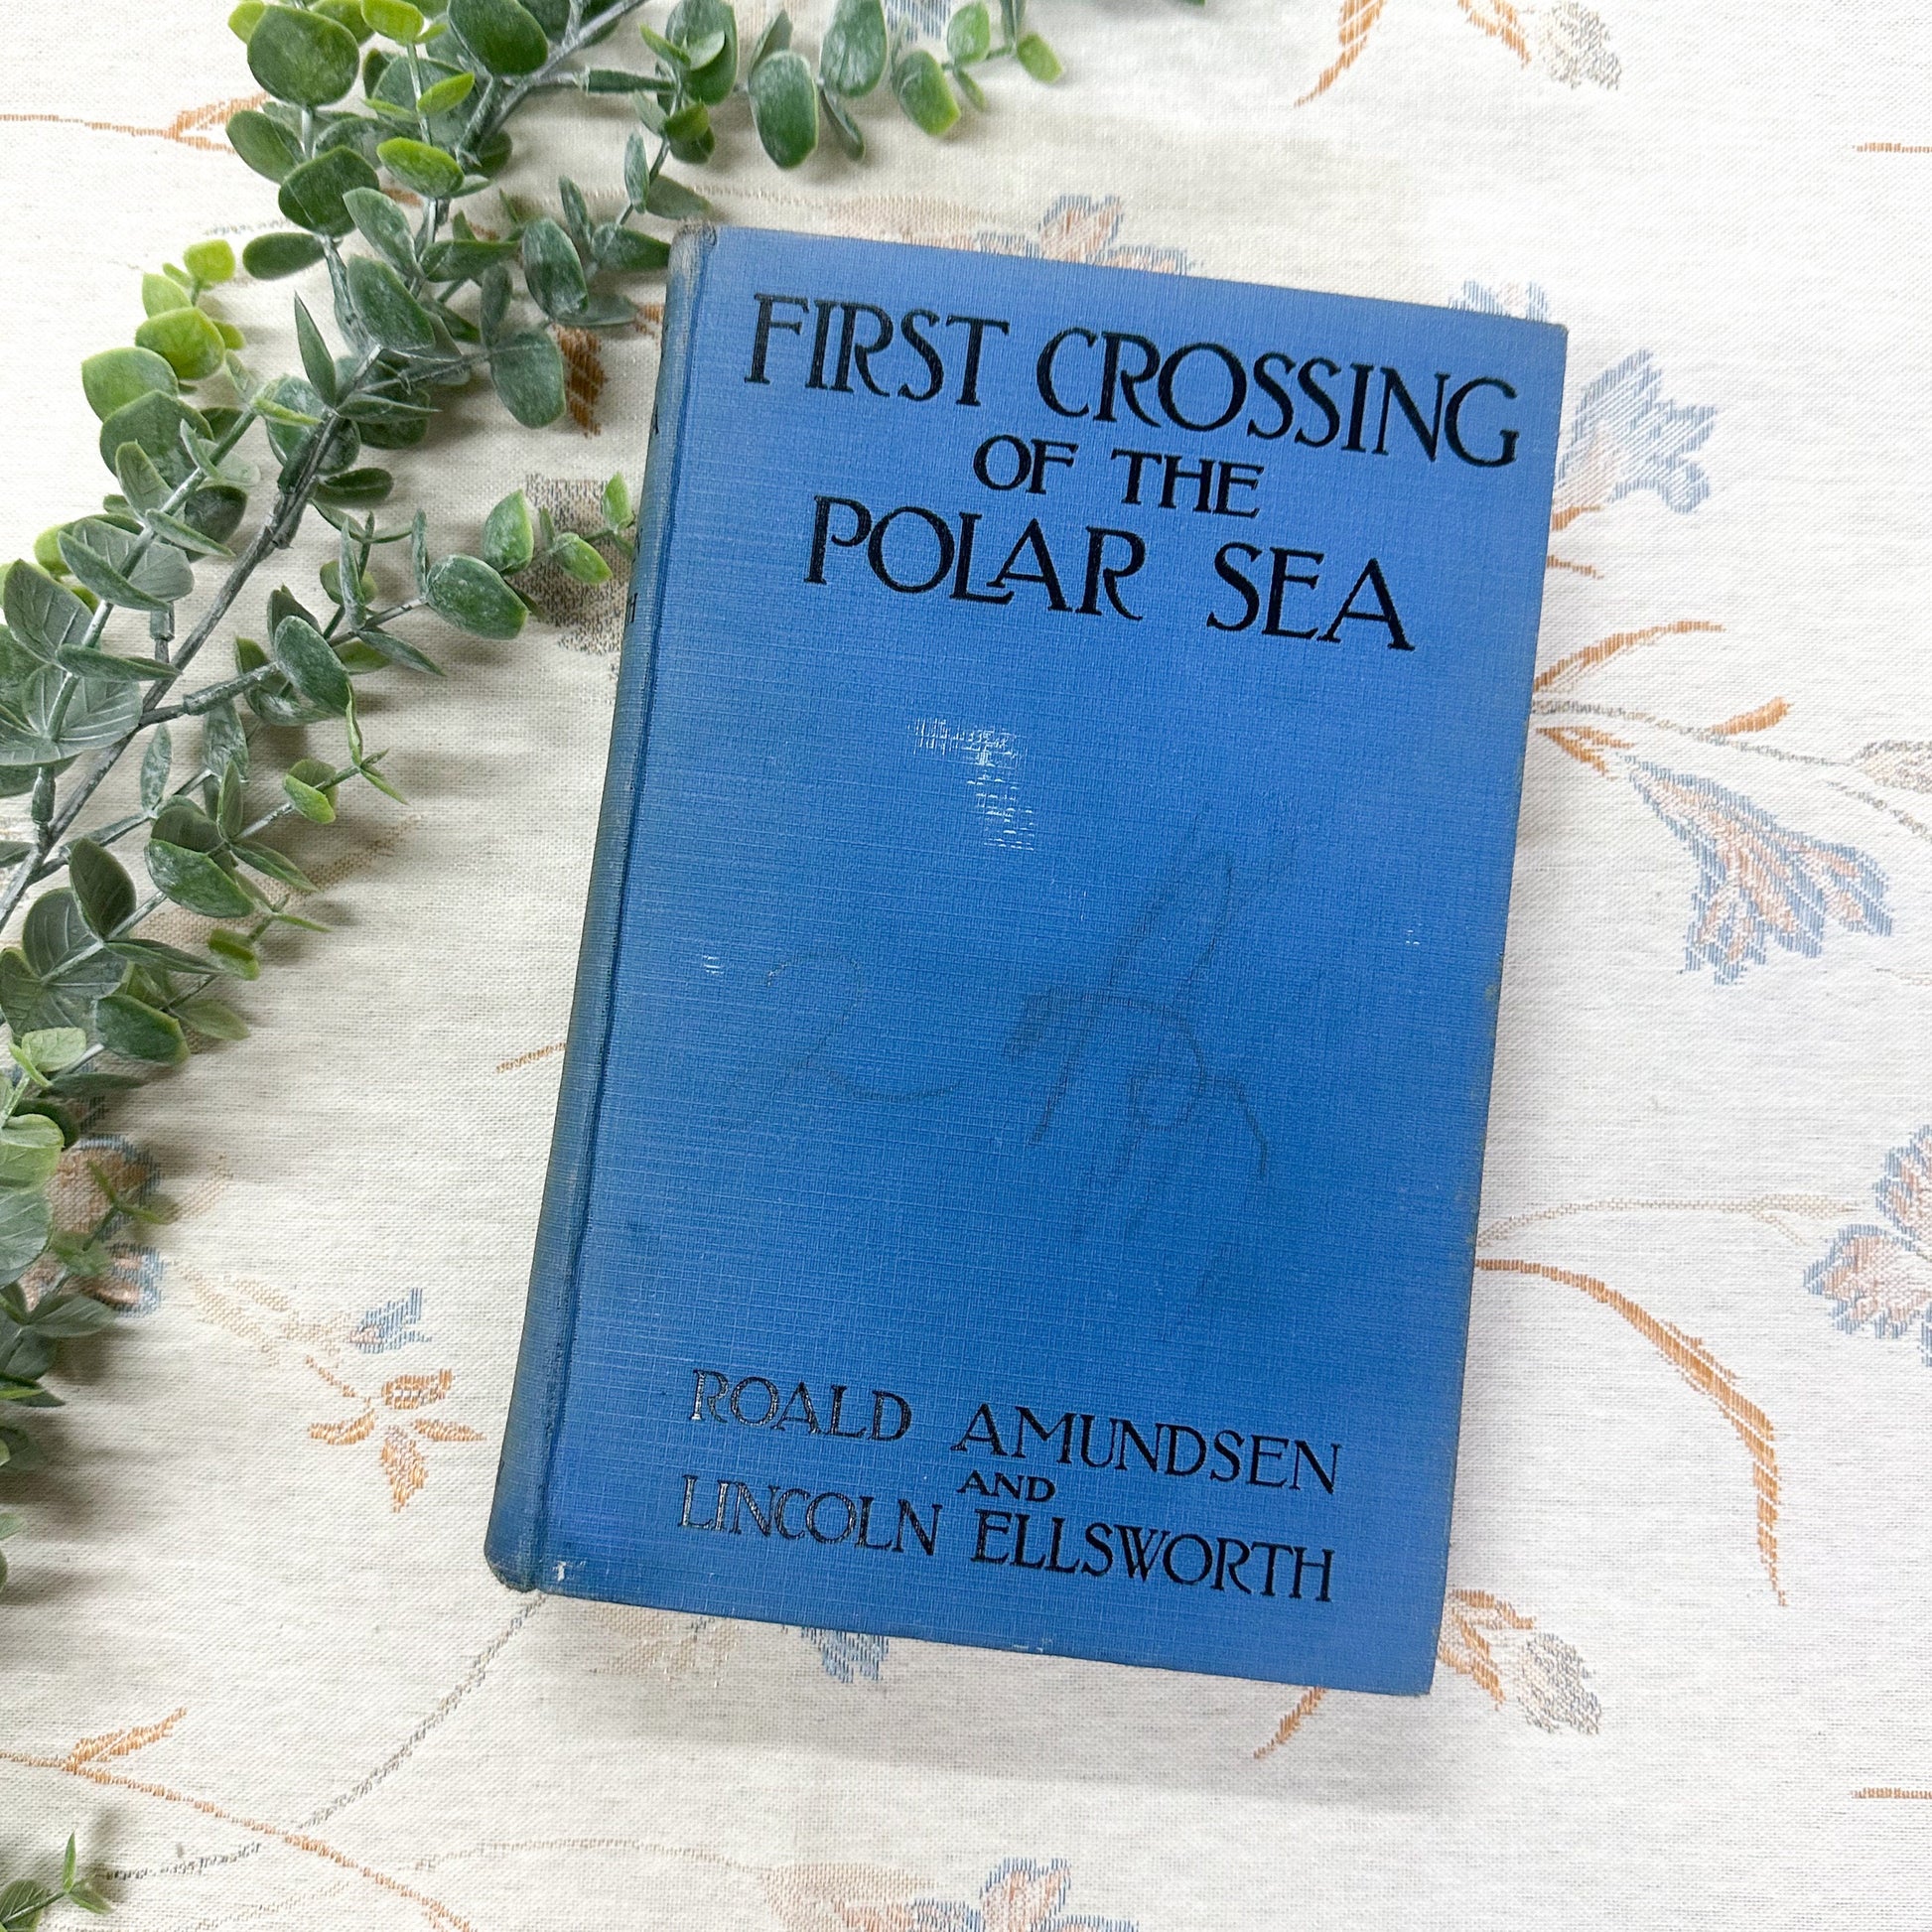 First Crossing of the Polar Sea by Roald Amundsen and Lincoln Ellsworth